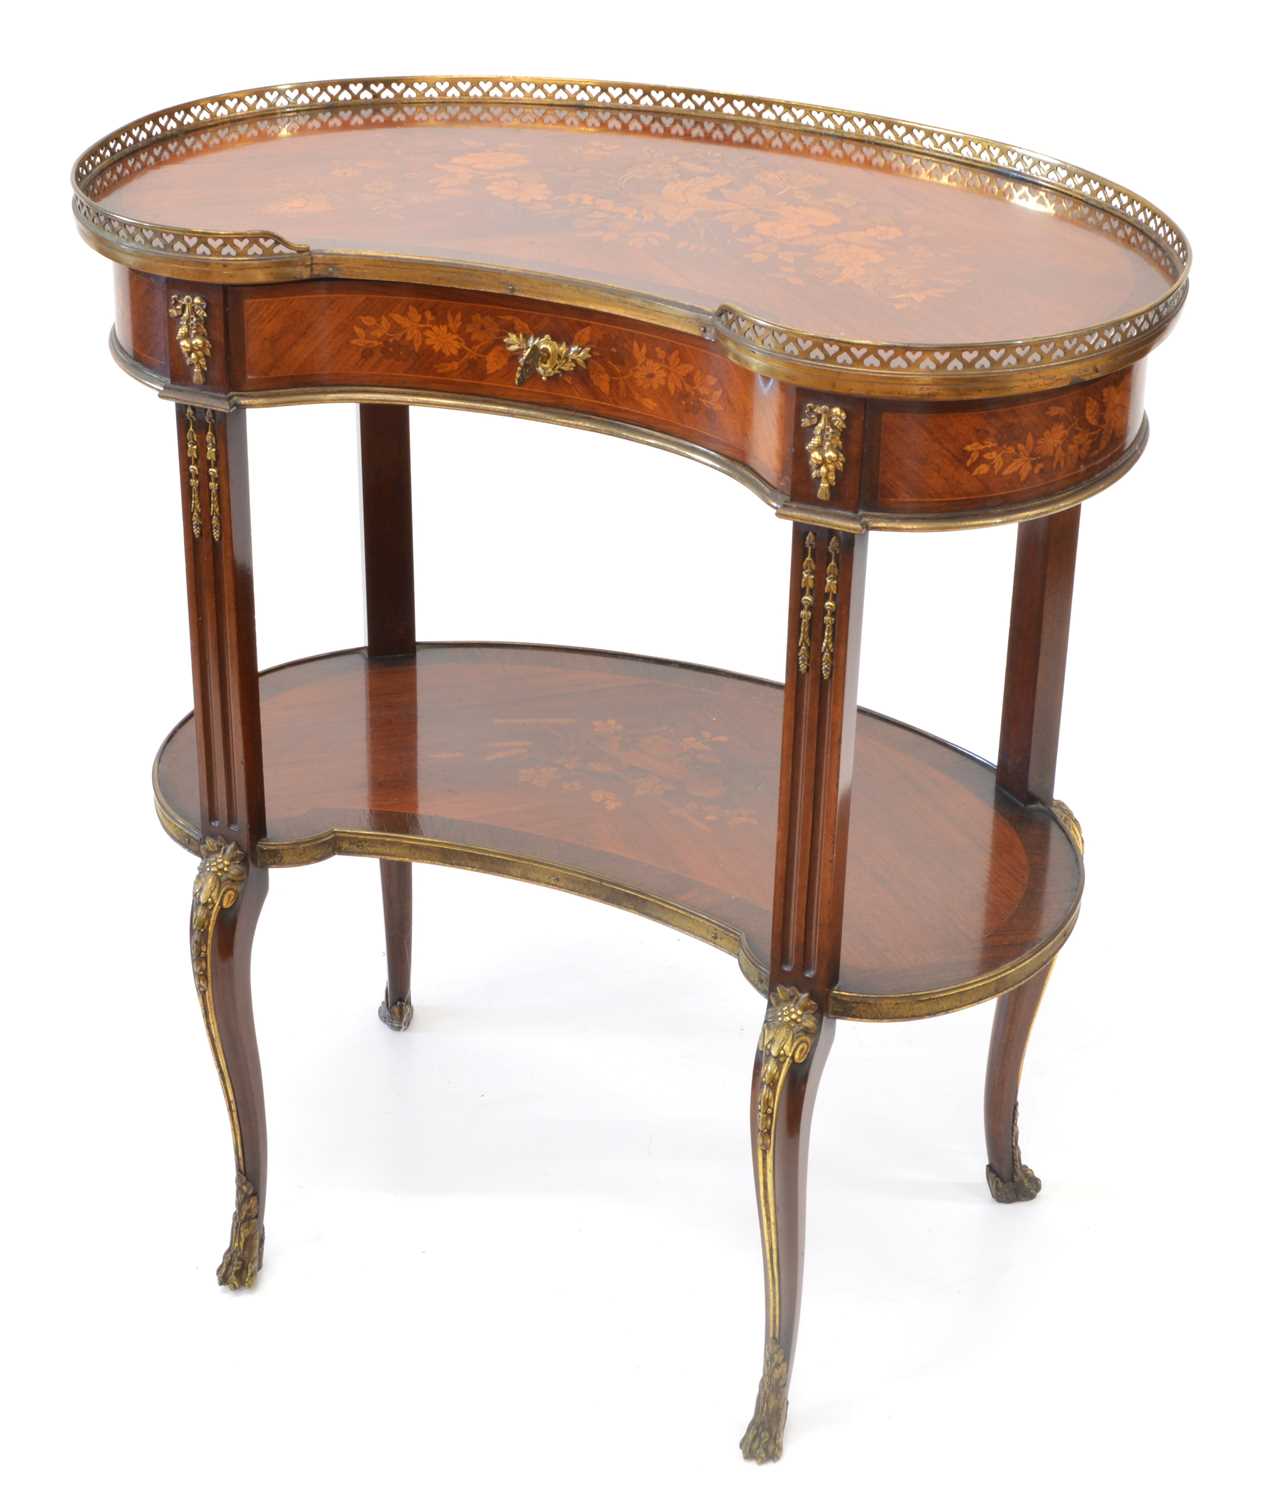 French Louis XV Style Kingwood Kidney Shaped Occasional Table